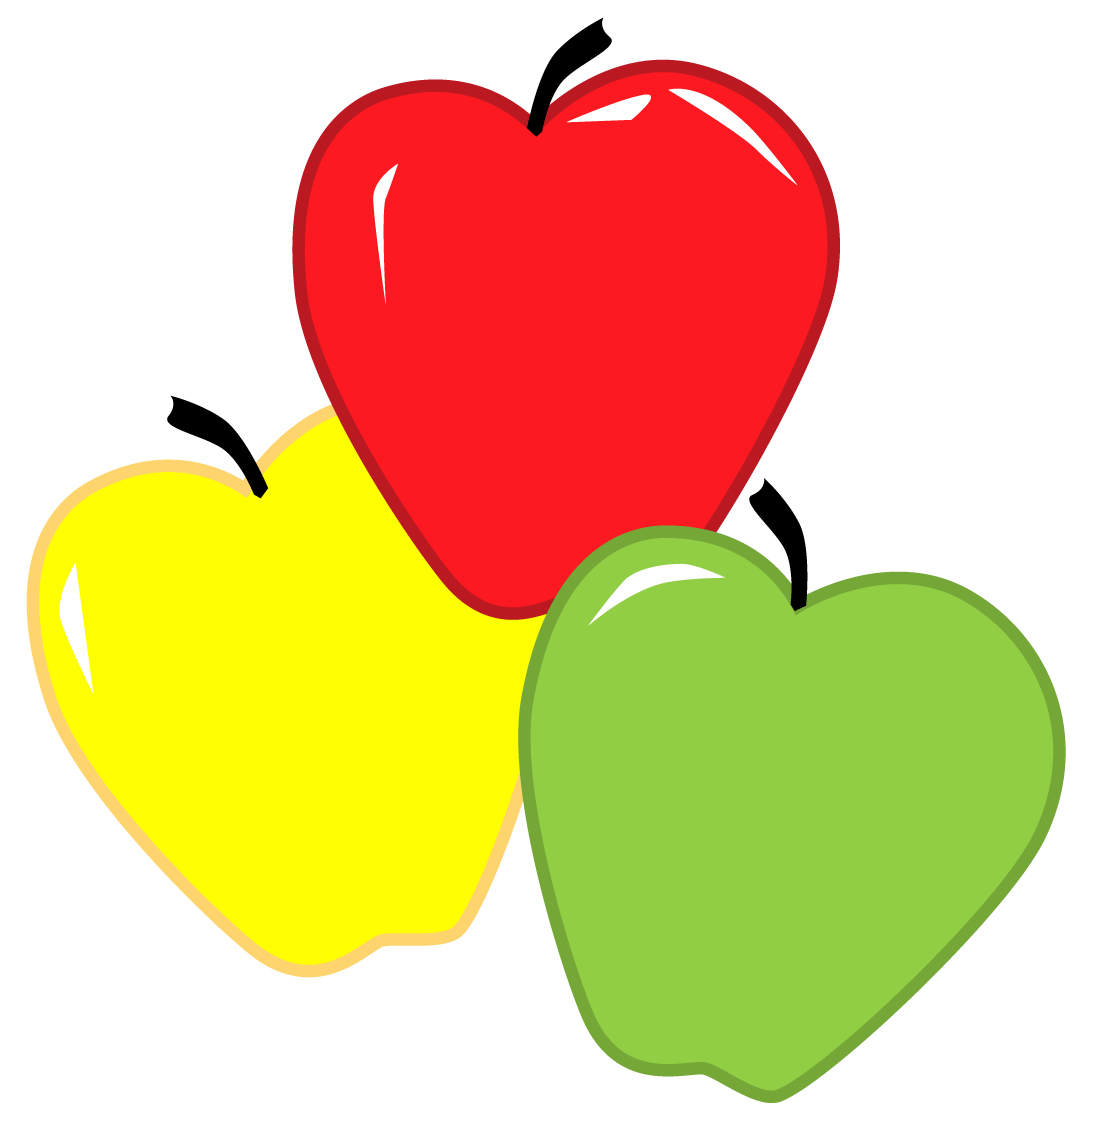 Pictures Of Apples To Color - ClipArt Best